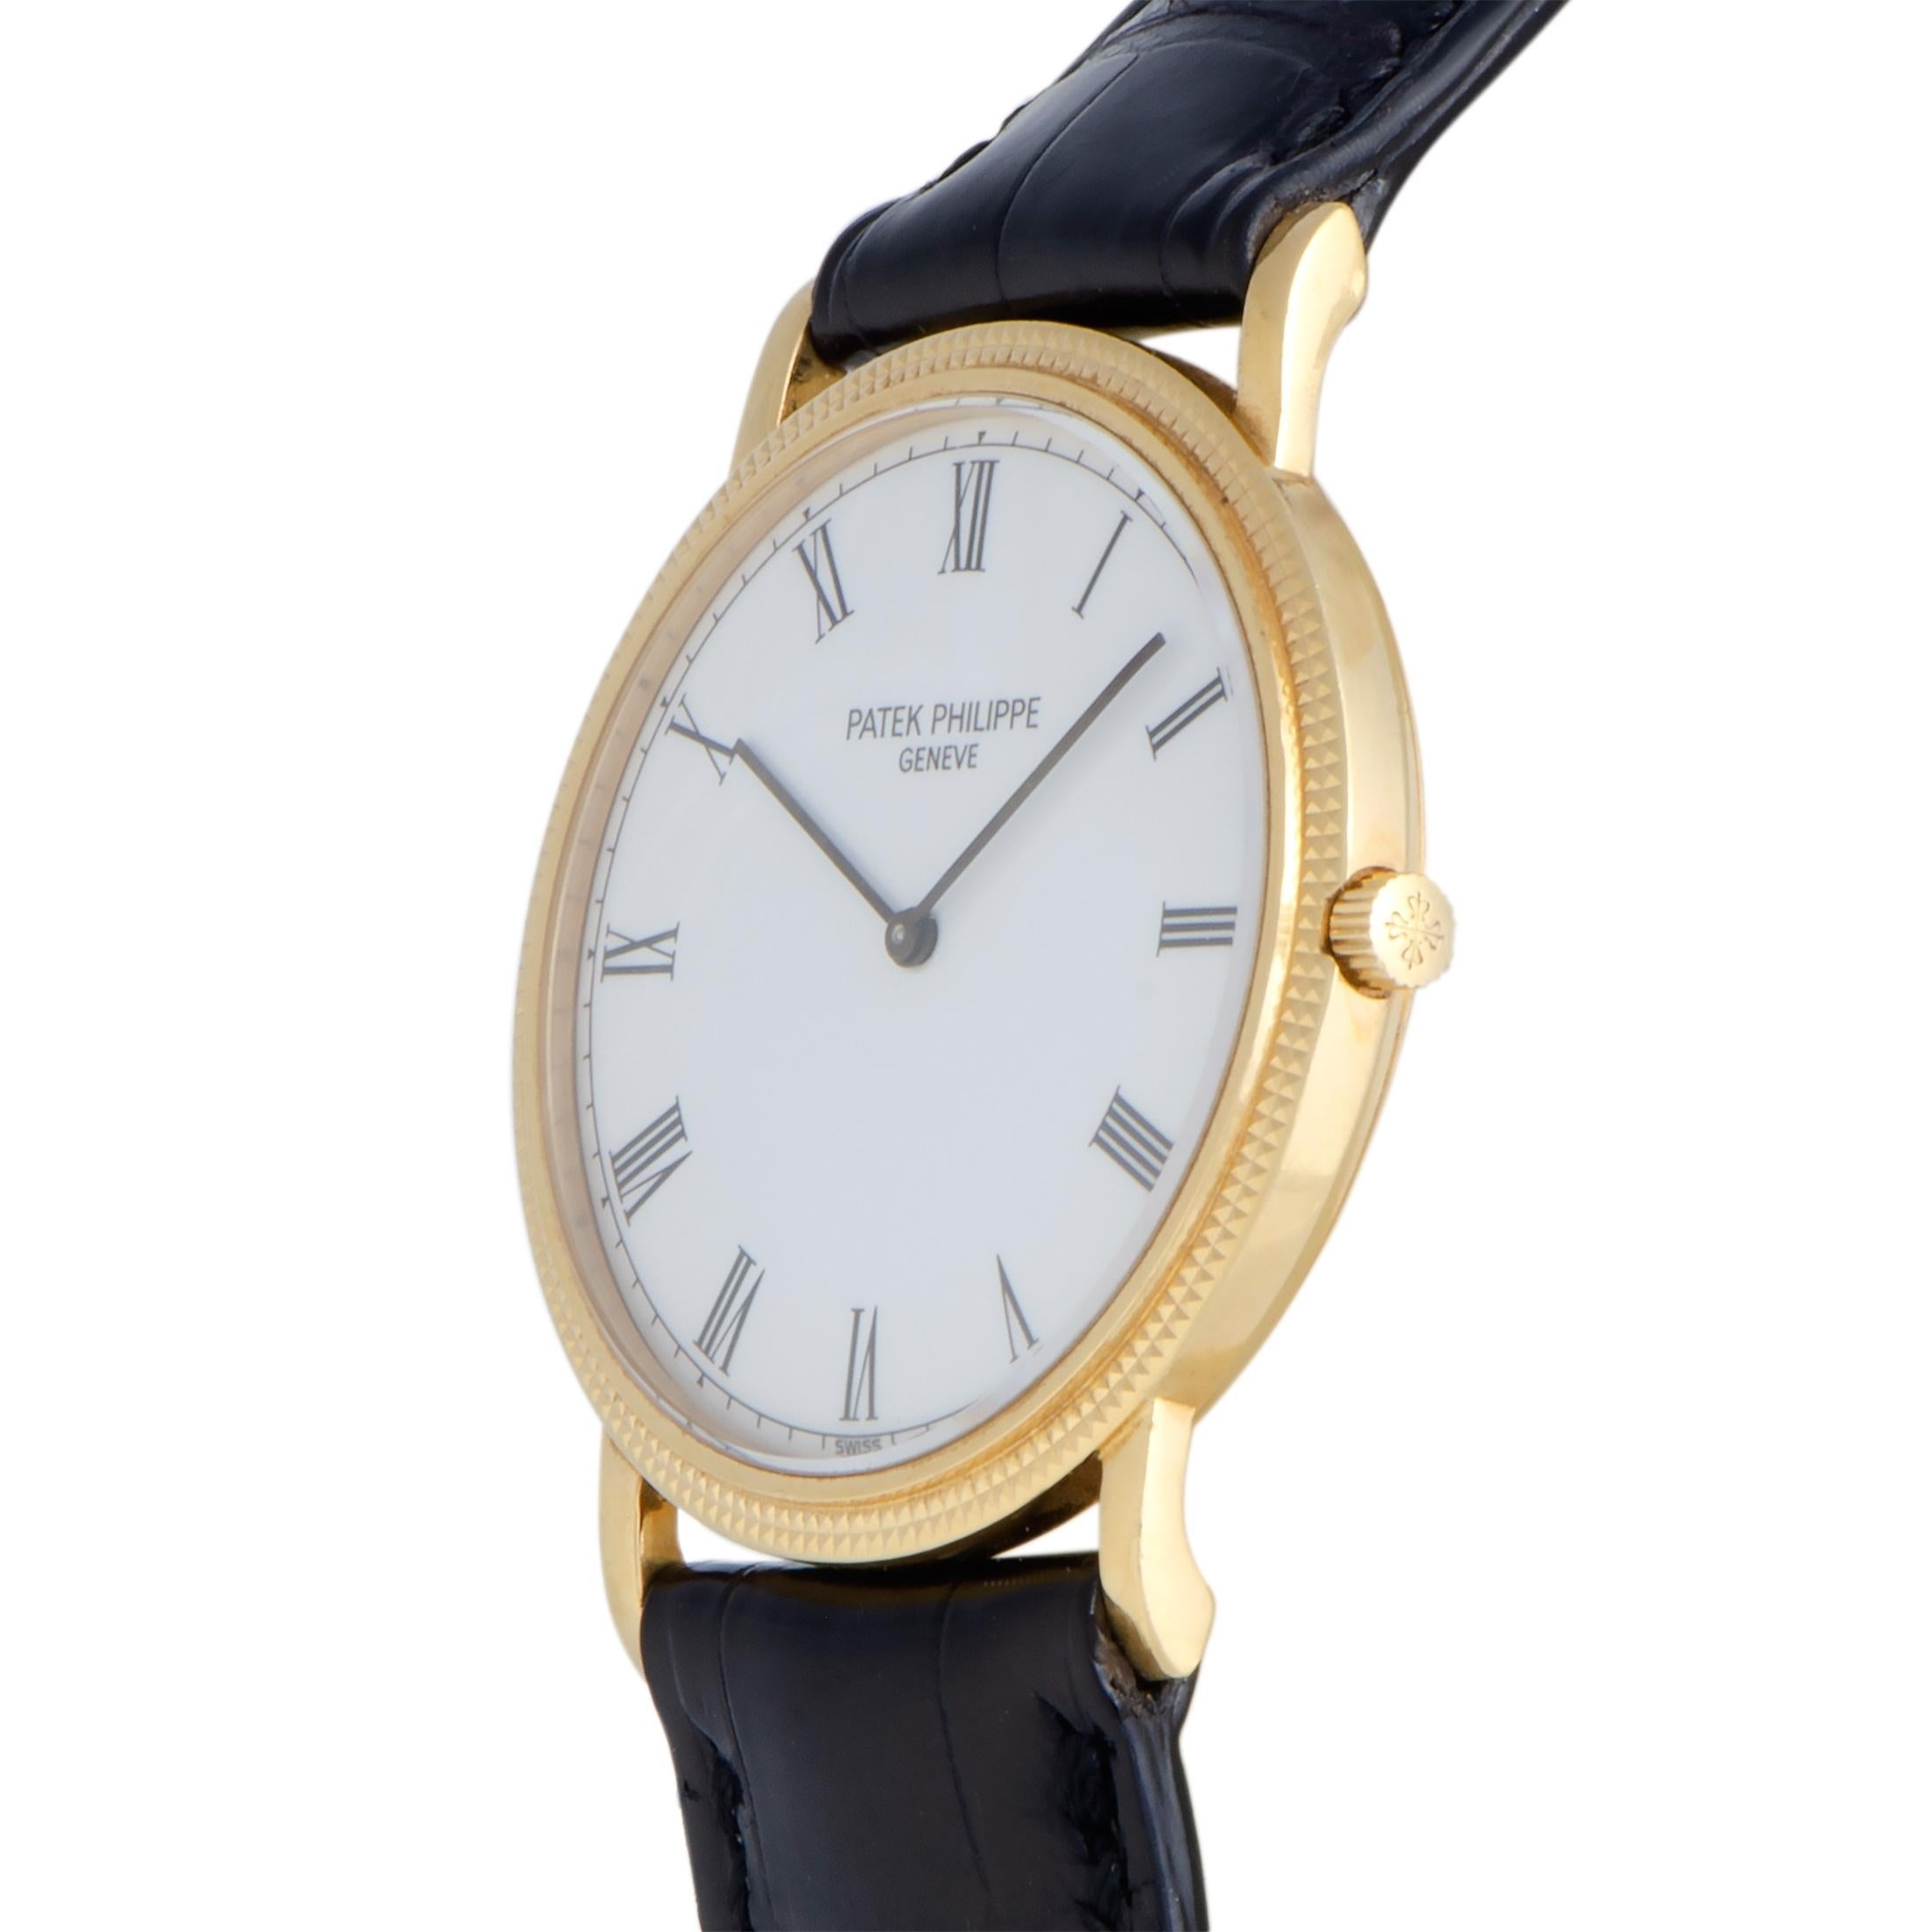 Brilliantly contrasting the flawlessly refined, elegantly minimalistic, and classically tasteful appearance of the dial and the overall design, the exquisitely finished bezel provides a touch of scintillating gold radiance in this sumptuous